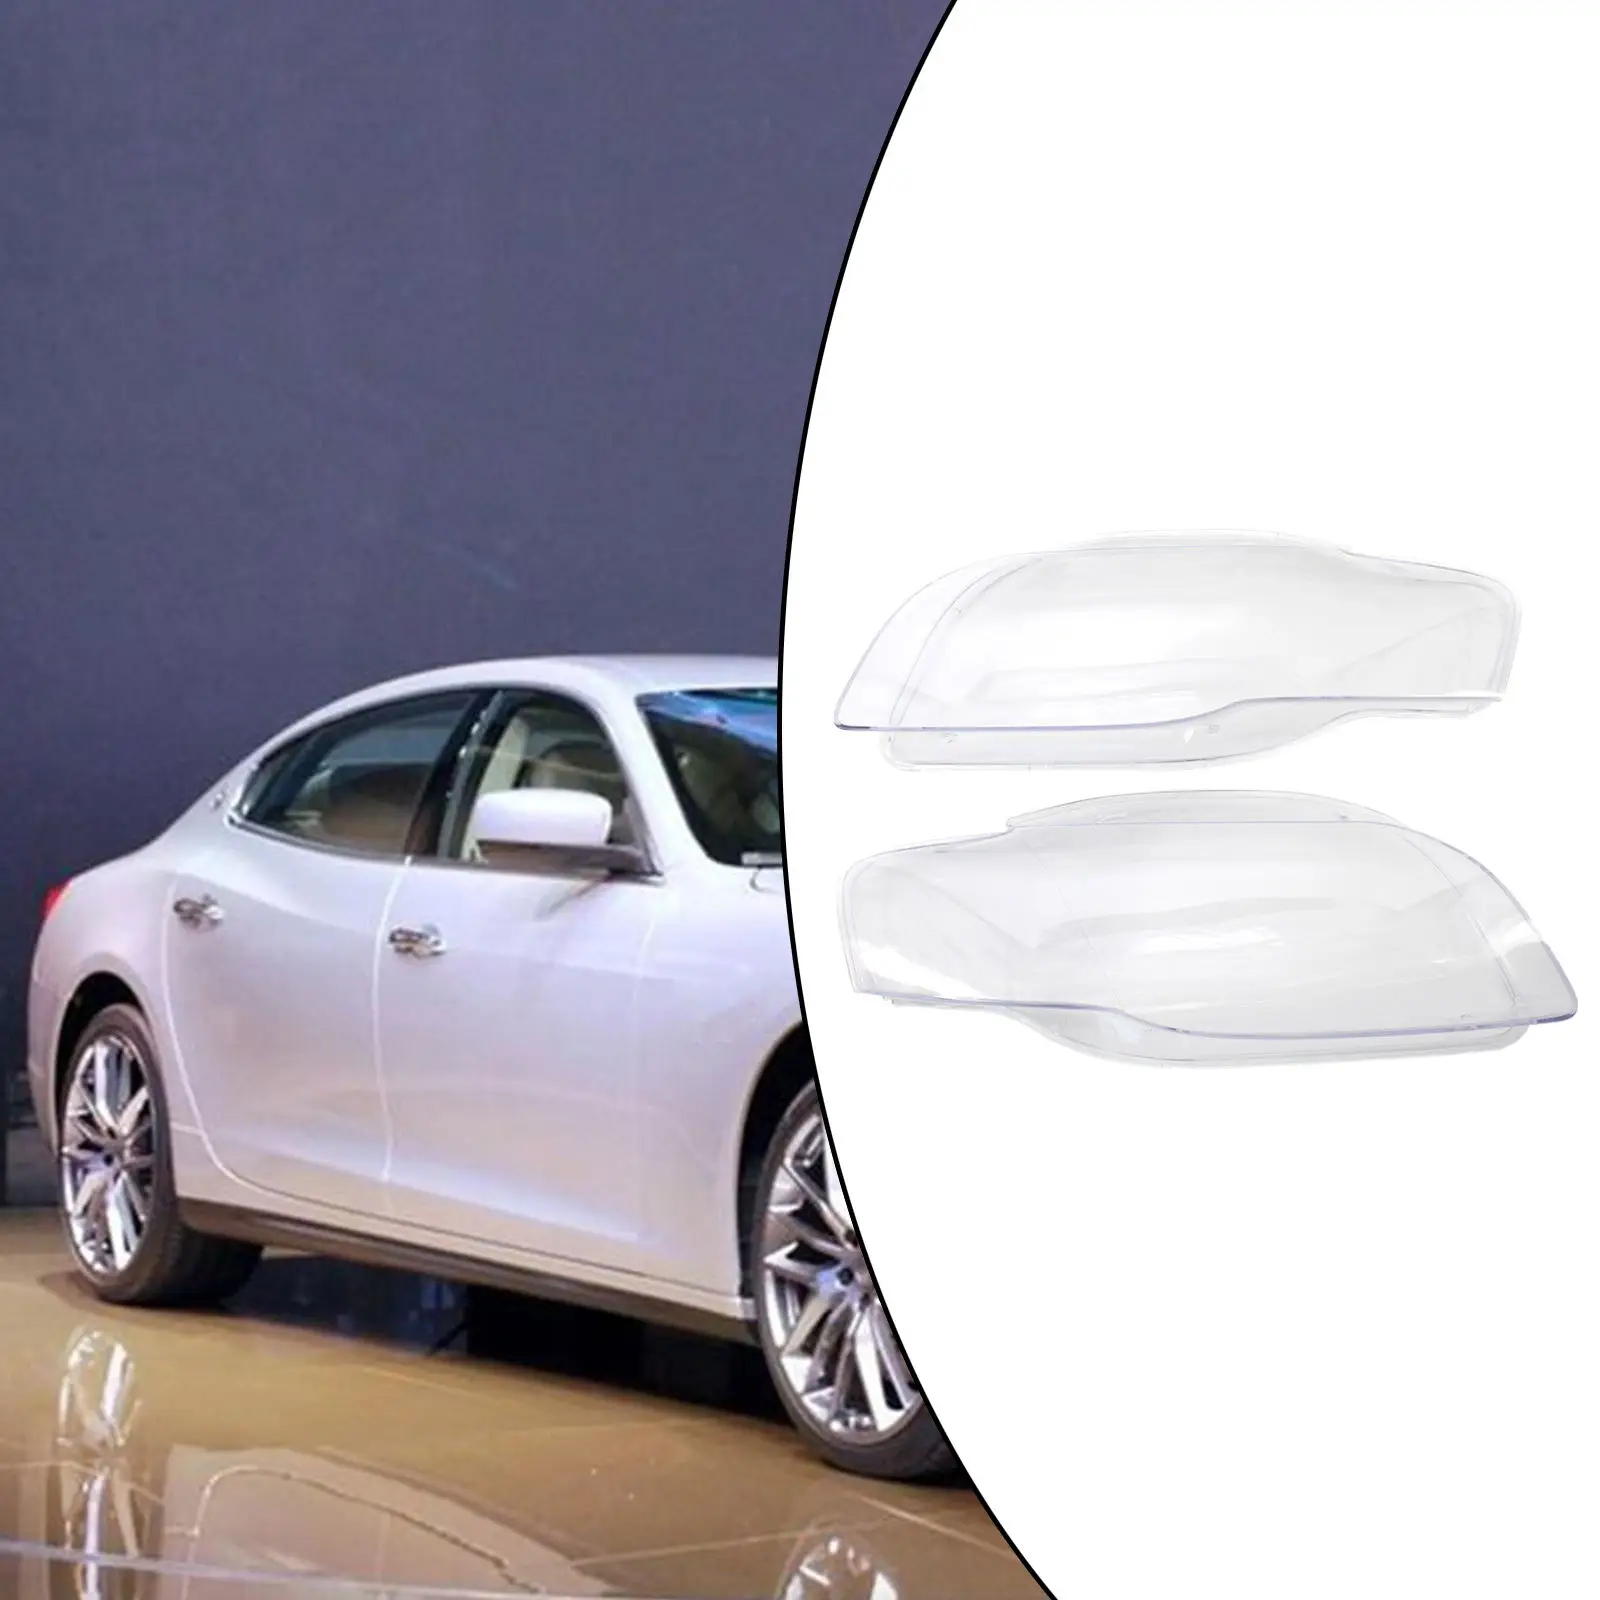 Lens Cover 1 Pair Dustproof Headlight Lampshade Fits for Audi A4 B7 S4 2005-2008 8E0941003 8E0941004